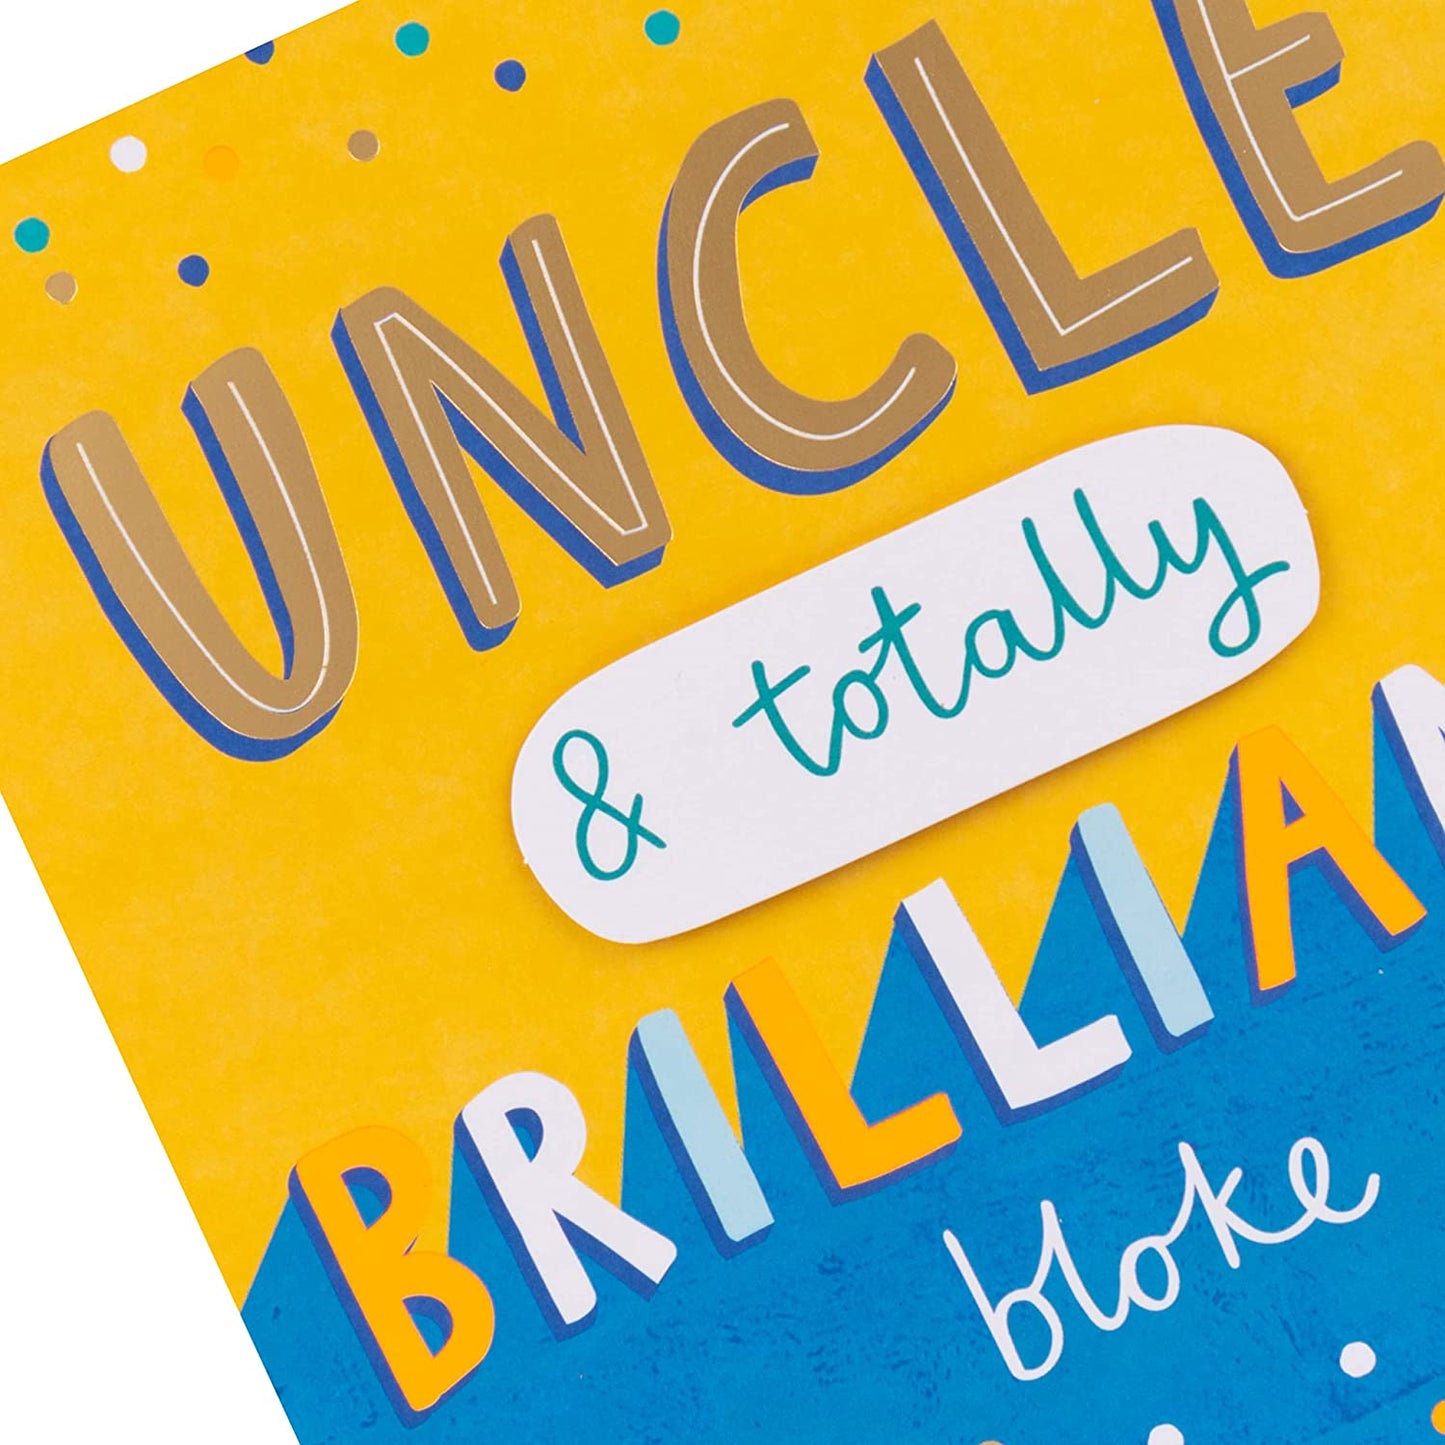 Contemporary Text Based Design Uncle Birthday Card